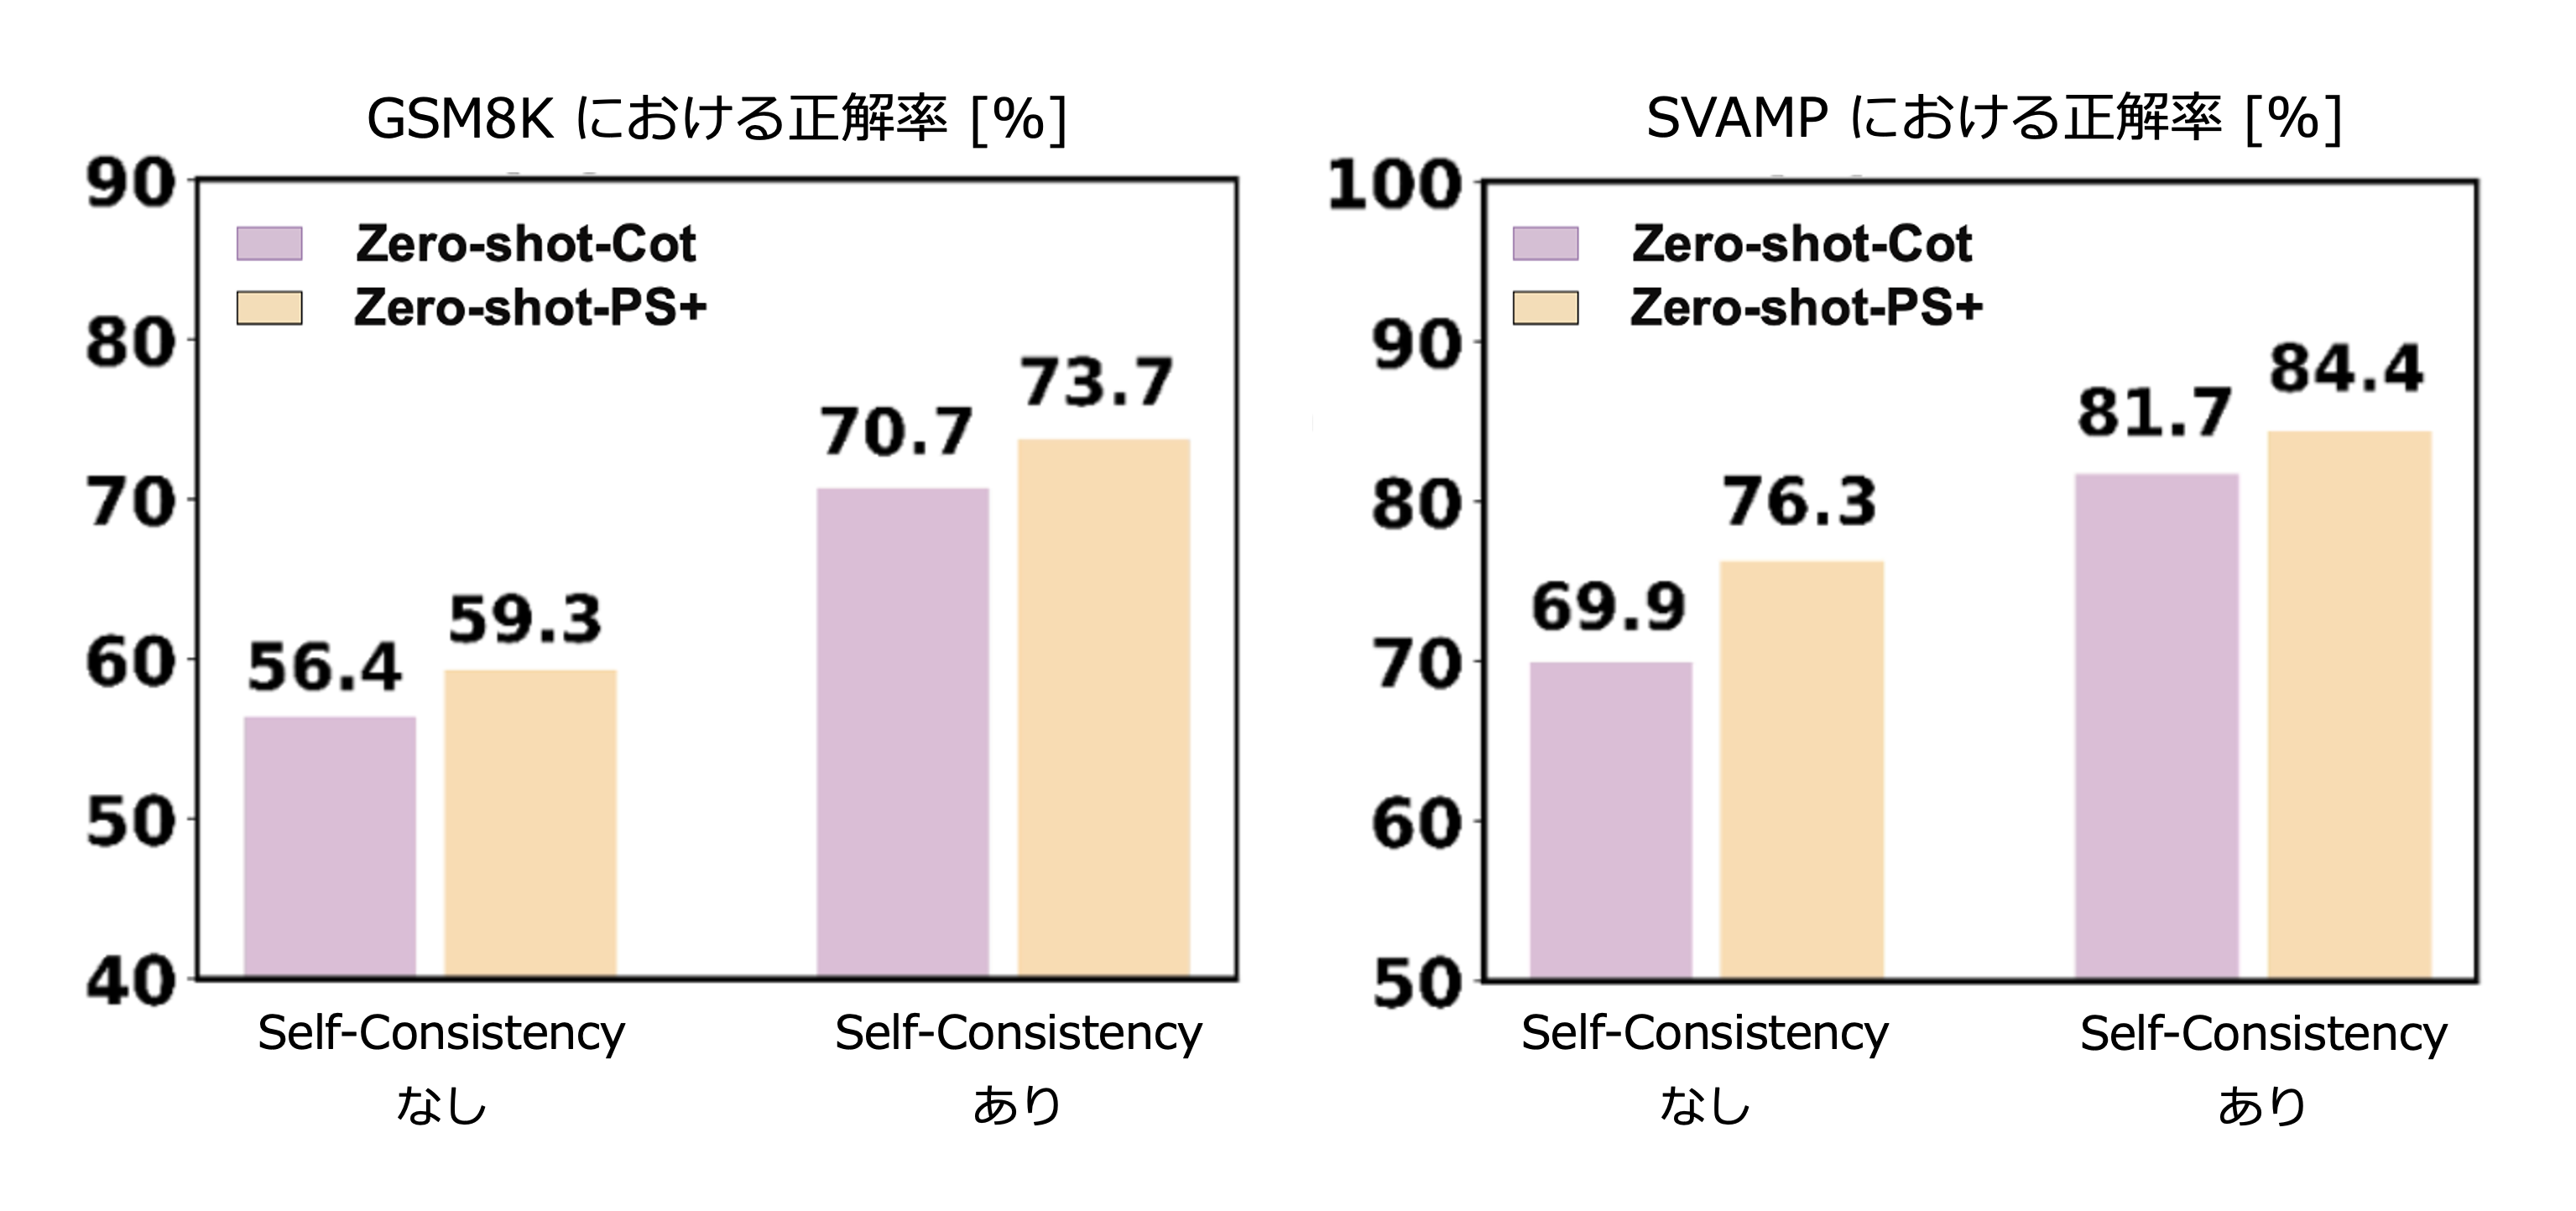 Self-Consistency を用いた評価